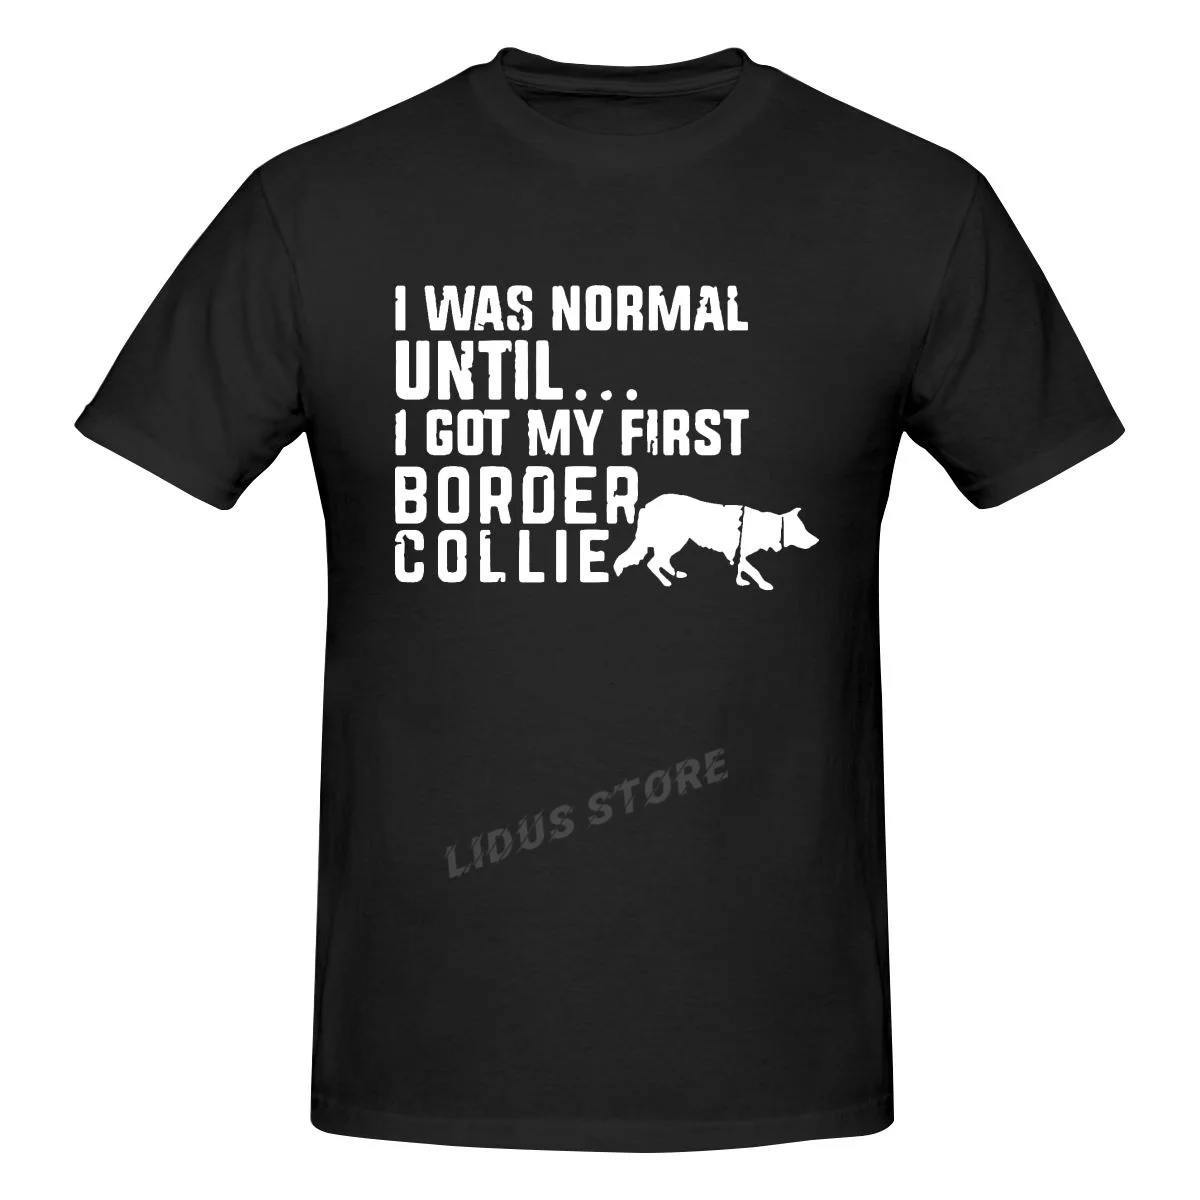 

Funny I Was Normal Until - Border Collie Letters T Shirt Short Sleeved Tee Shirt O Neck Men Tees